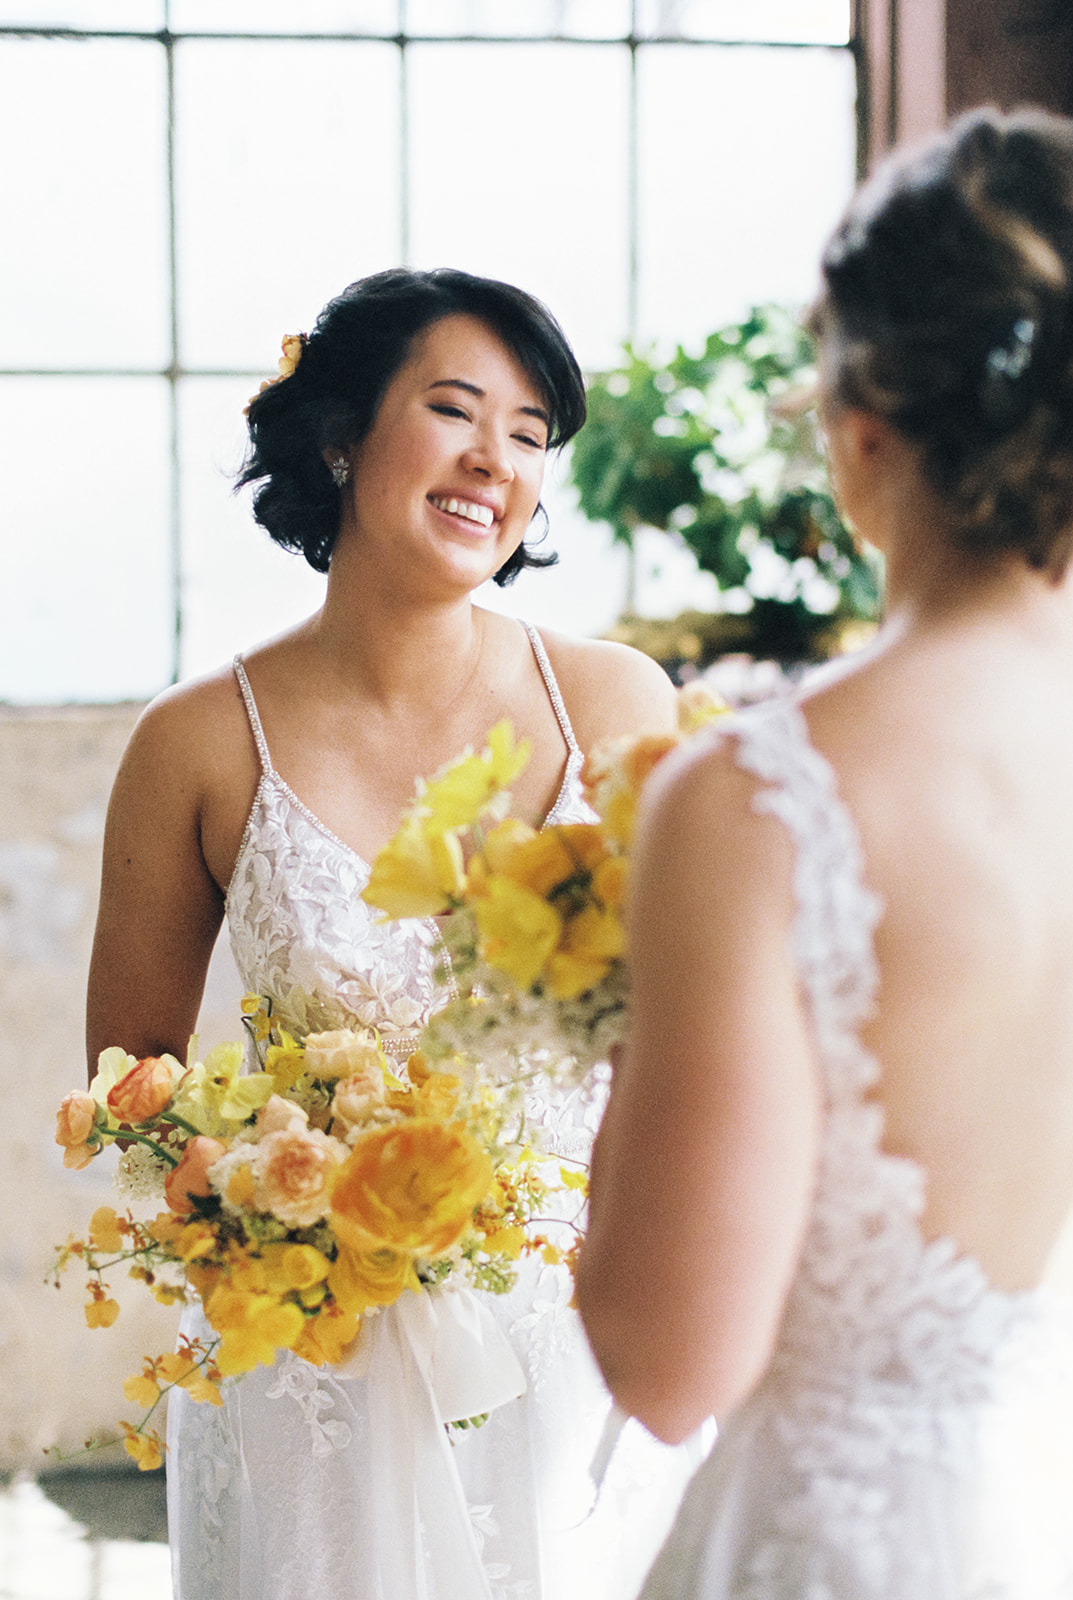 bride holding yellow and orange bouquet smiling at another bride